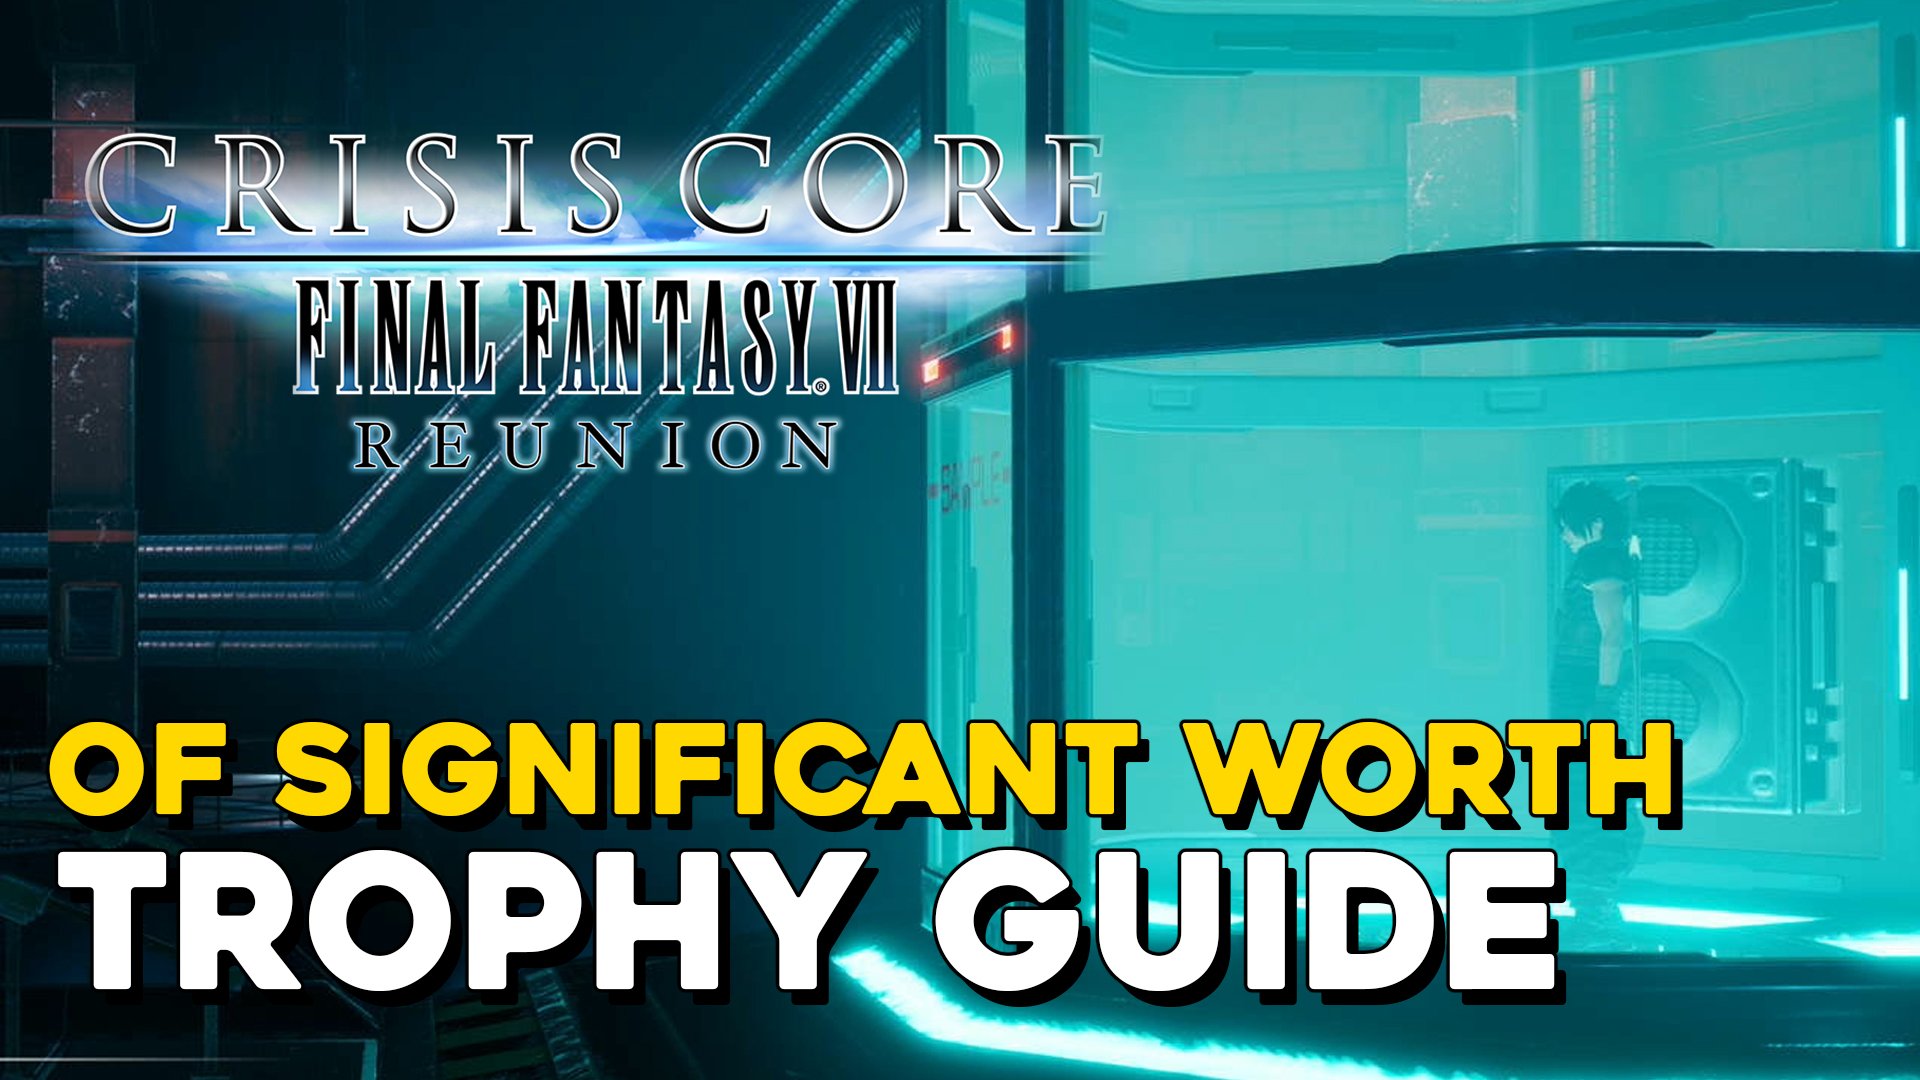 Crisis Core Final Fantasy 7 Reunion Of Significant Worth Trophy Guide.jpg